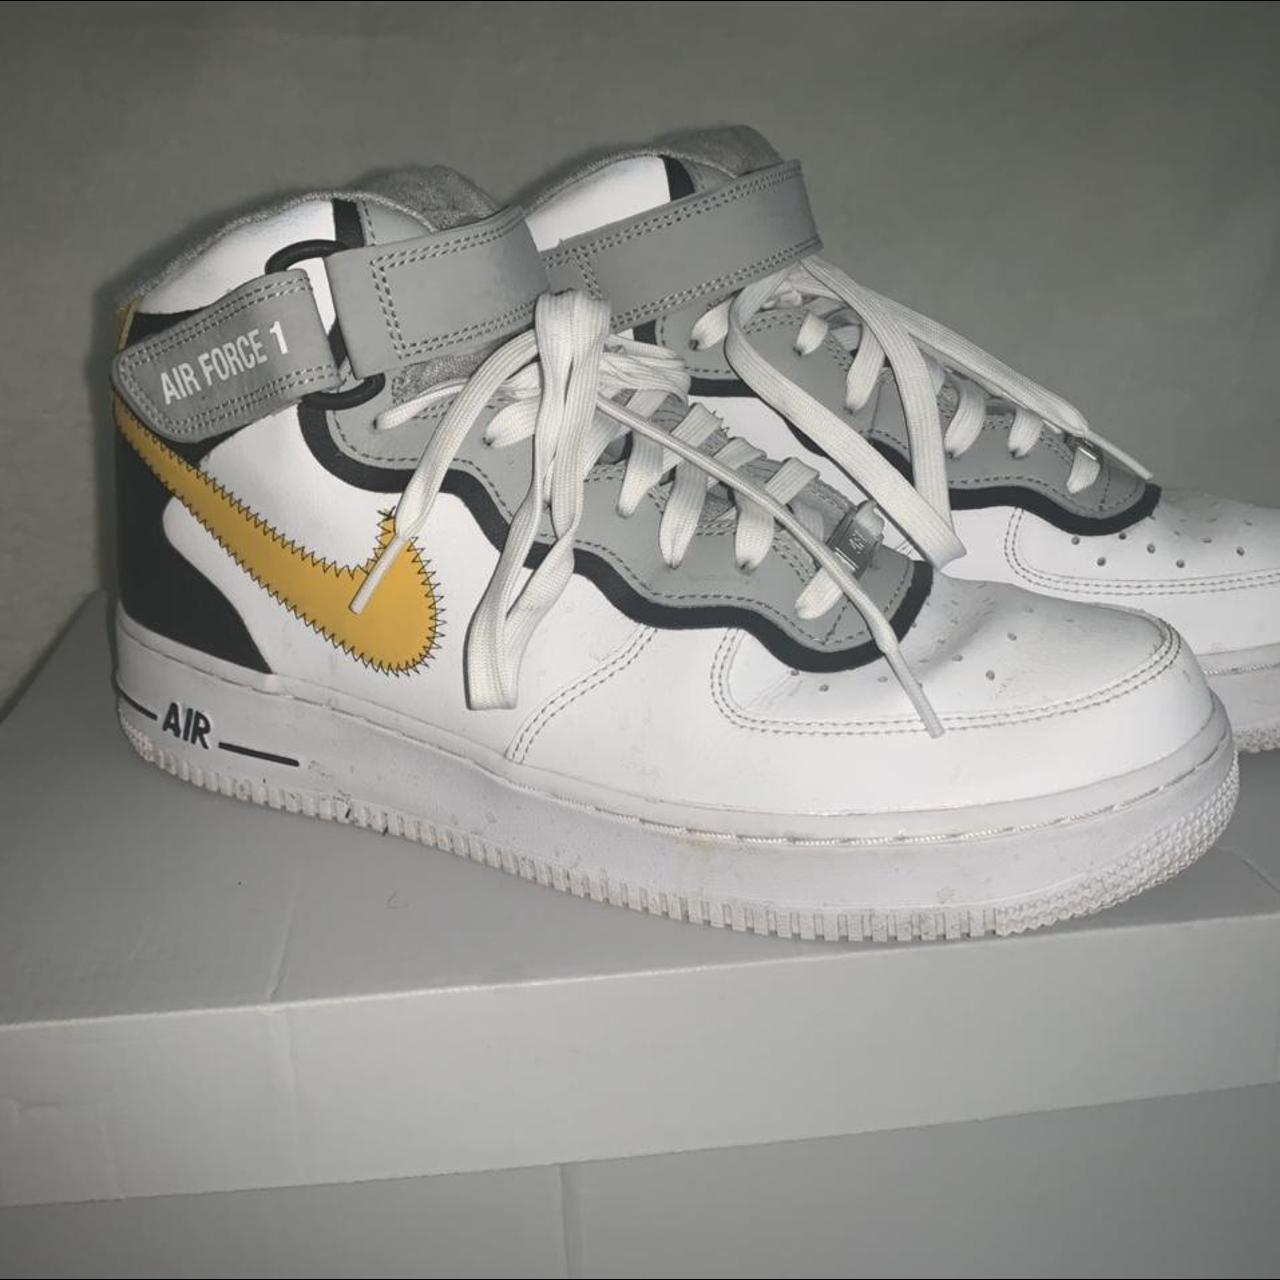  Nike Air Force 1 Mid '07 Lv8 Mens Size - 9.5